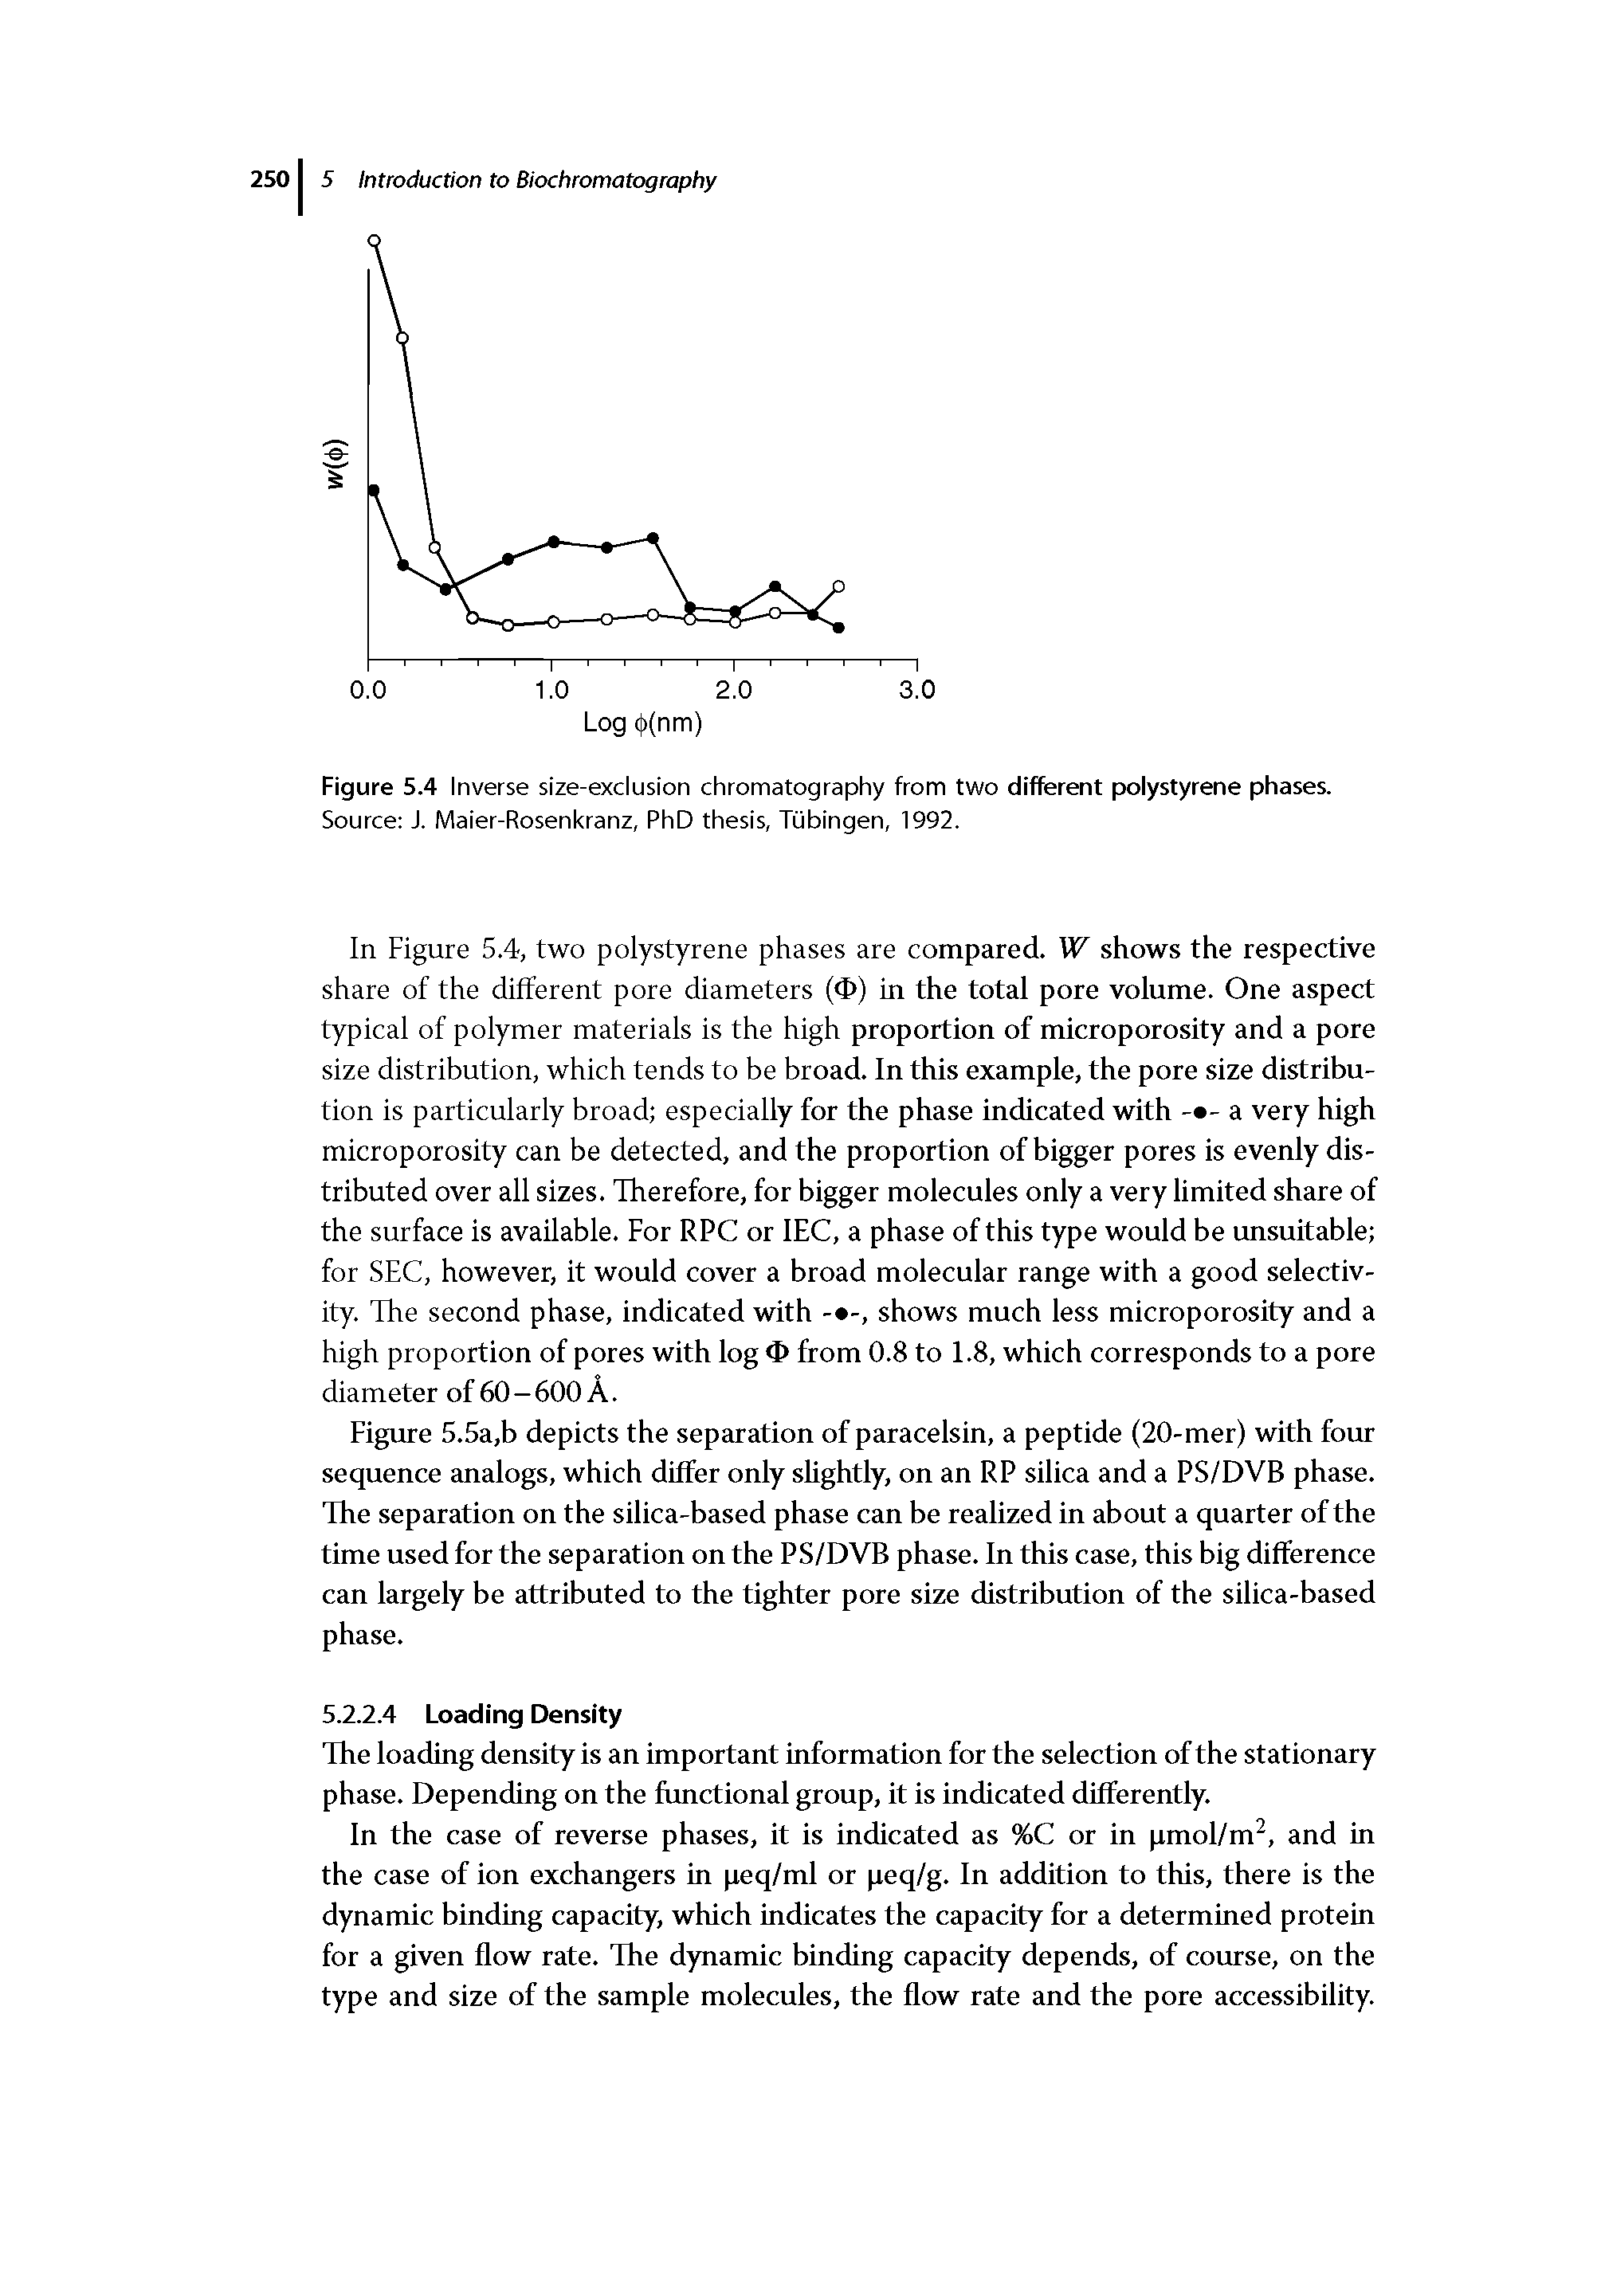 Figure 5.4 Inverse size-exclusion chromatography from two different poiystyrene phases. Source J. Maier-Rosenkranz, PhD thesis, Tubingen, 1992.